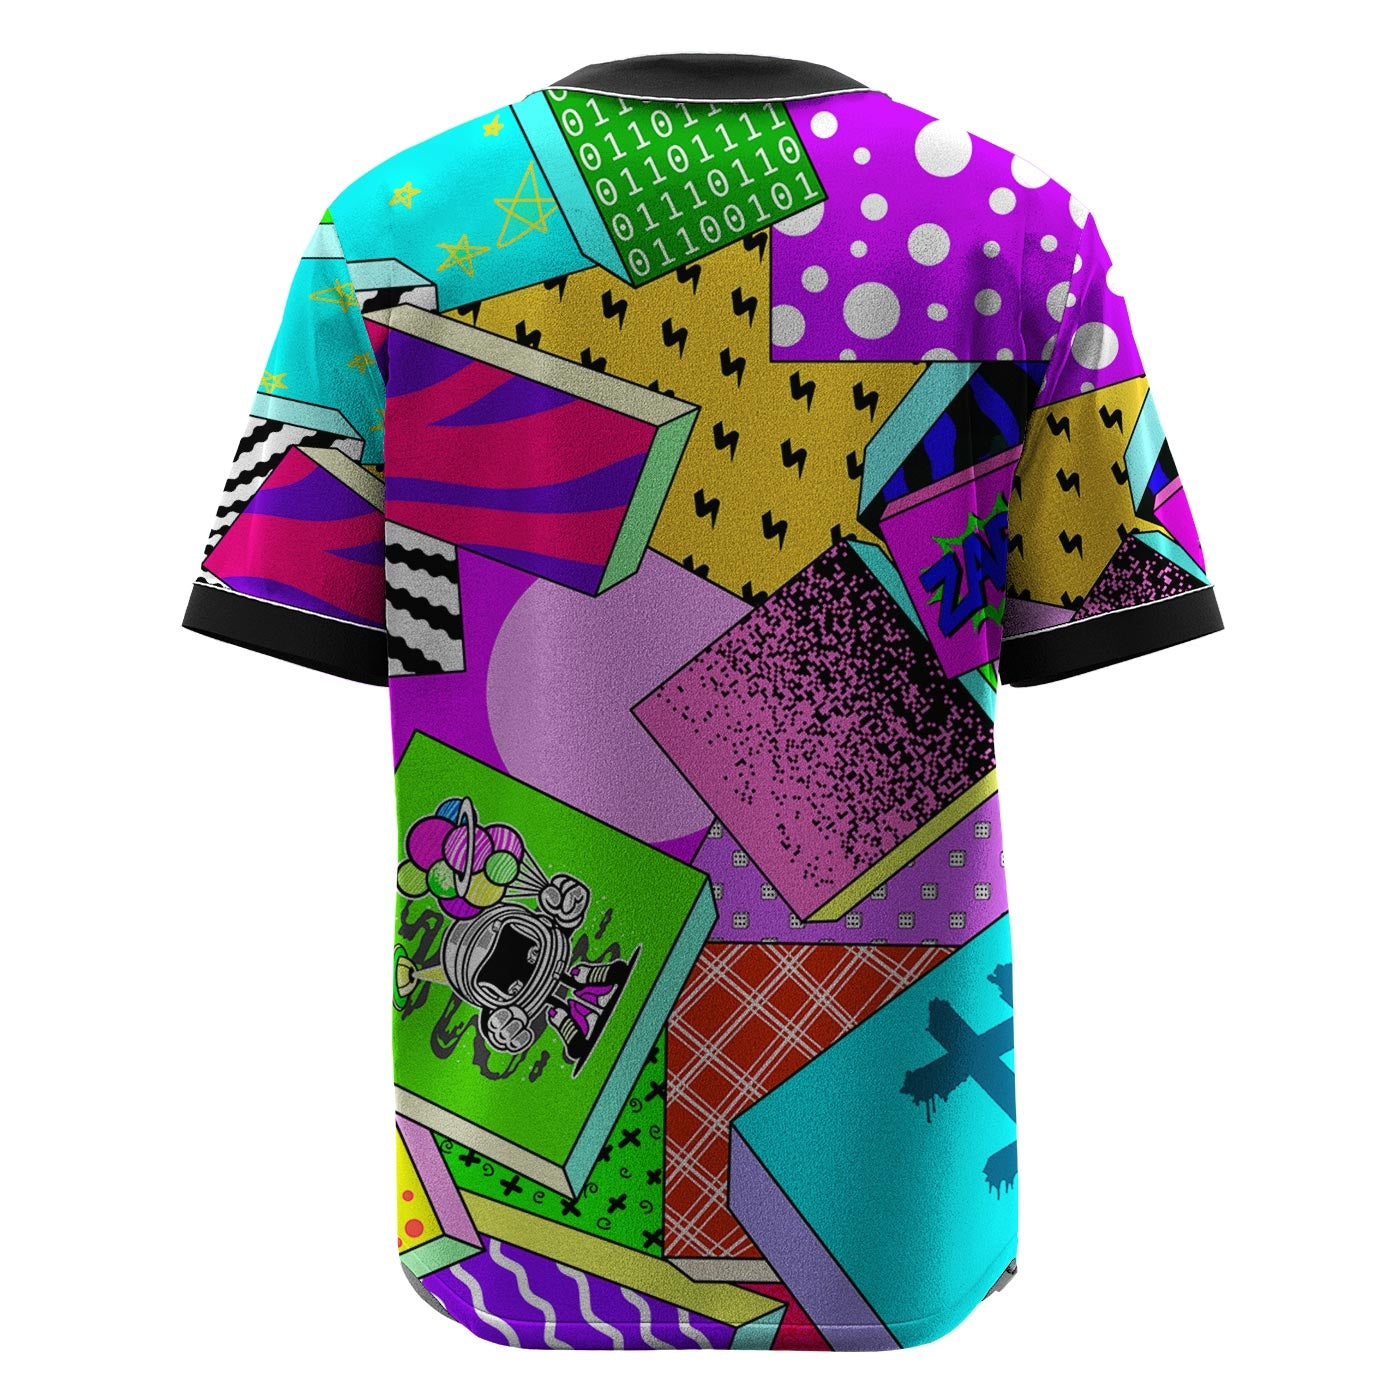 Zap Attack Jersey